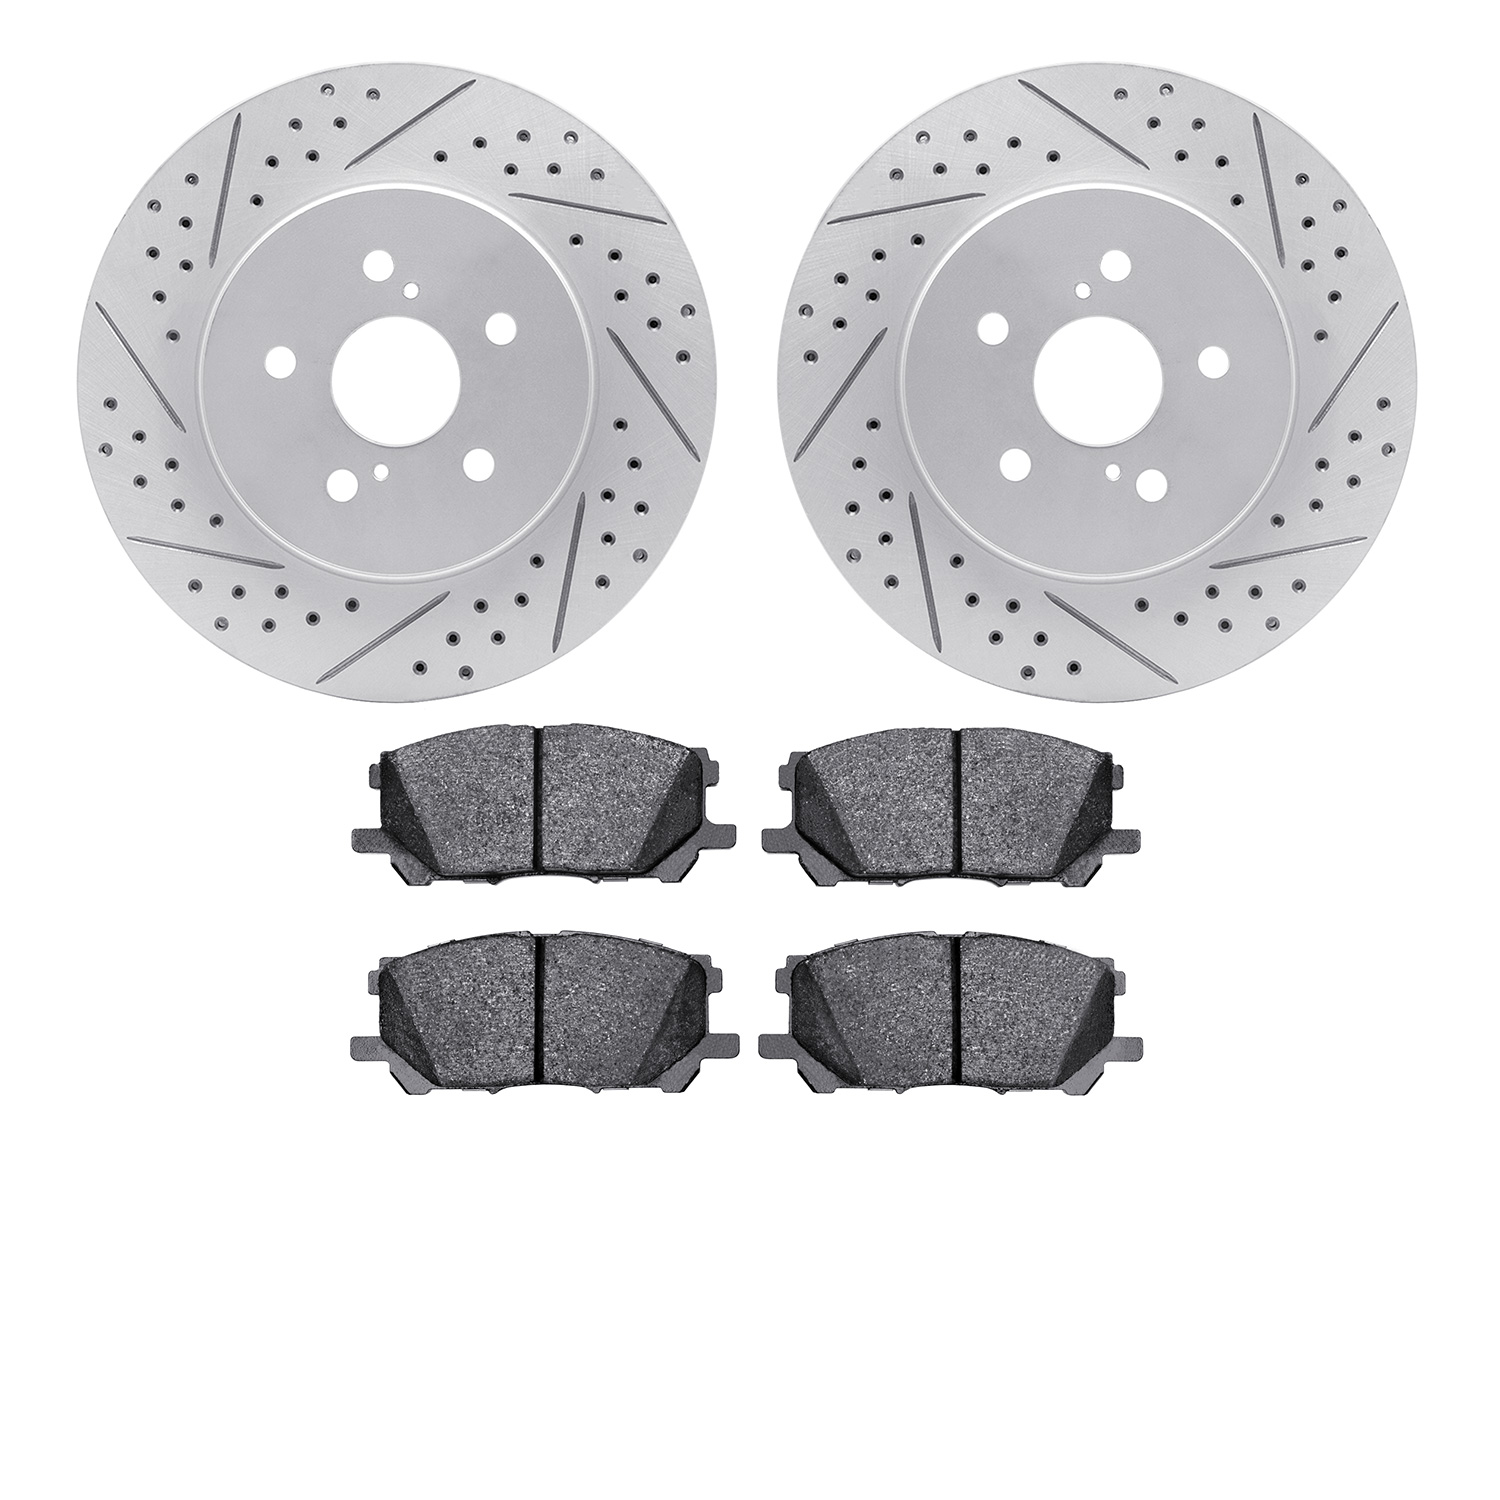 2502-76151 Geoperformance Drilled/Slotted Rotors w/5000 Advanced Brake Pads Kit, 2004-2009 Lexus/Toyota/Scion, Position: Front